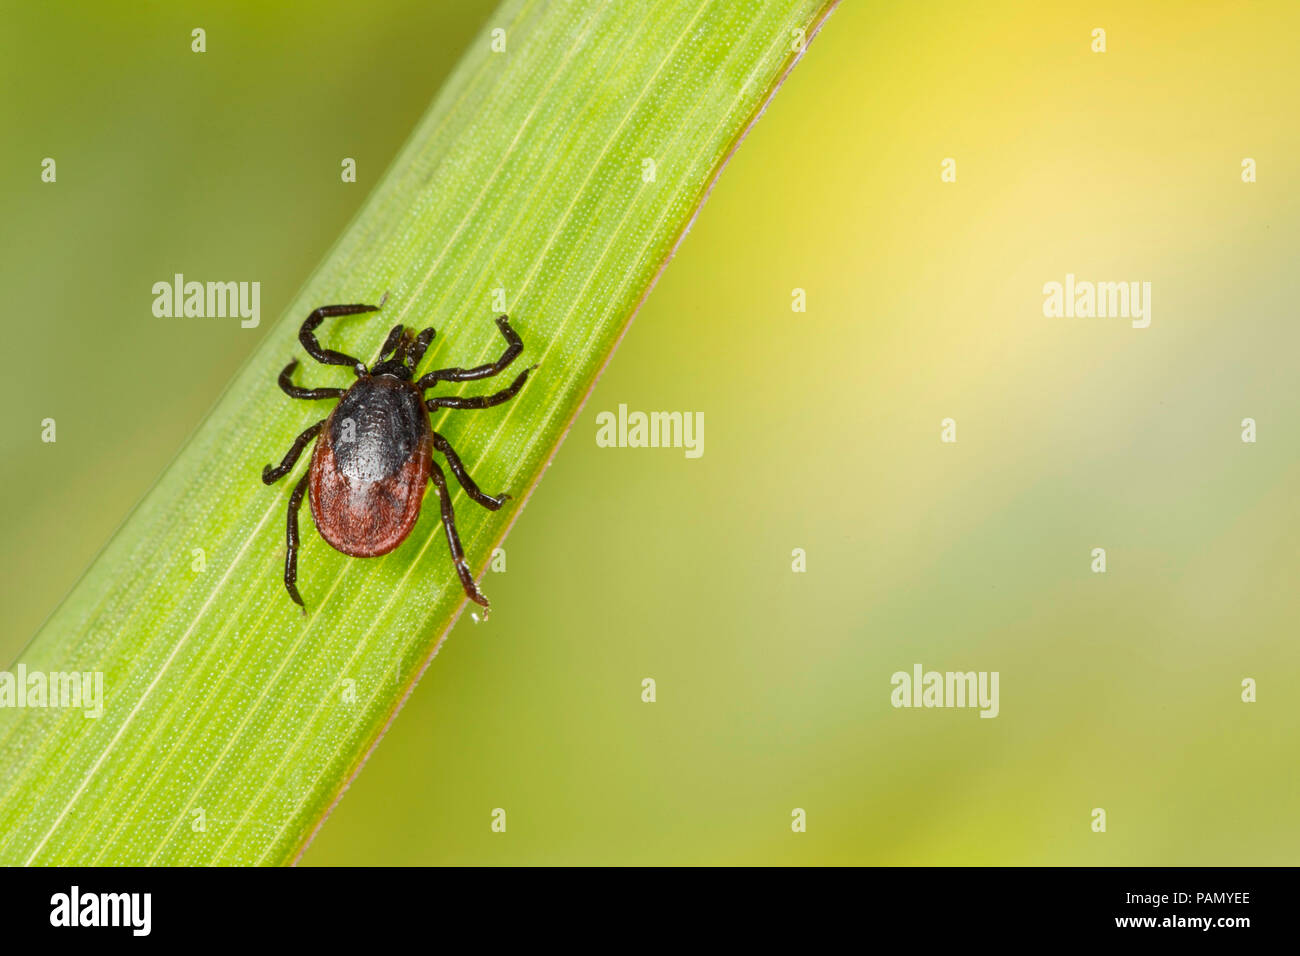 Castor Bean Tick (Ixodes ricinus) on a blade of grass. Germany Stock Photo